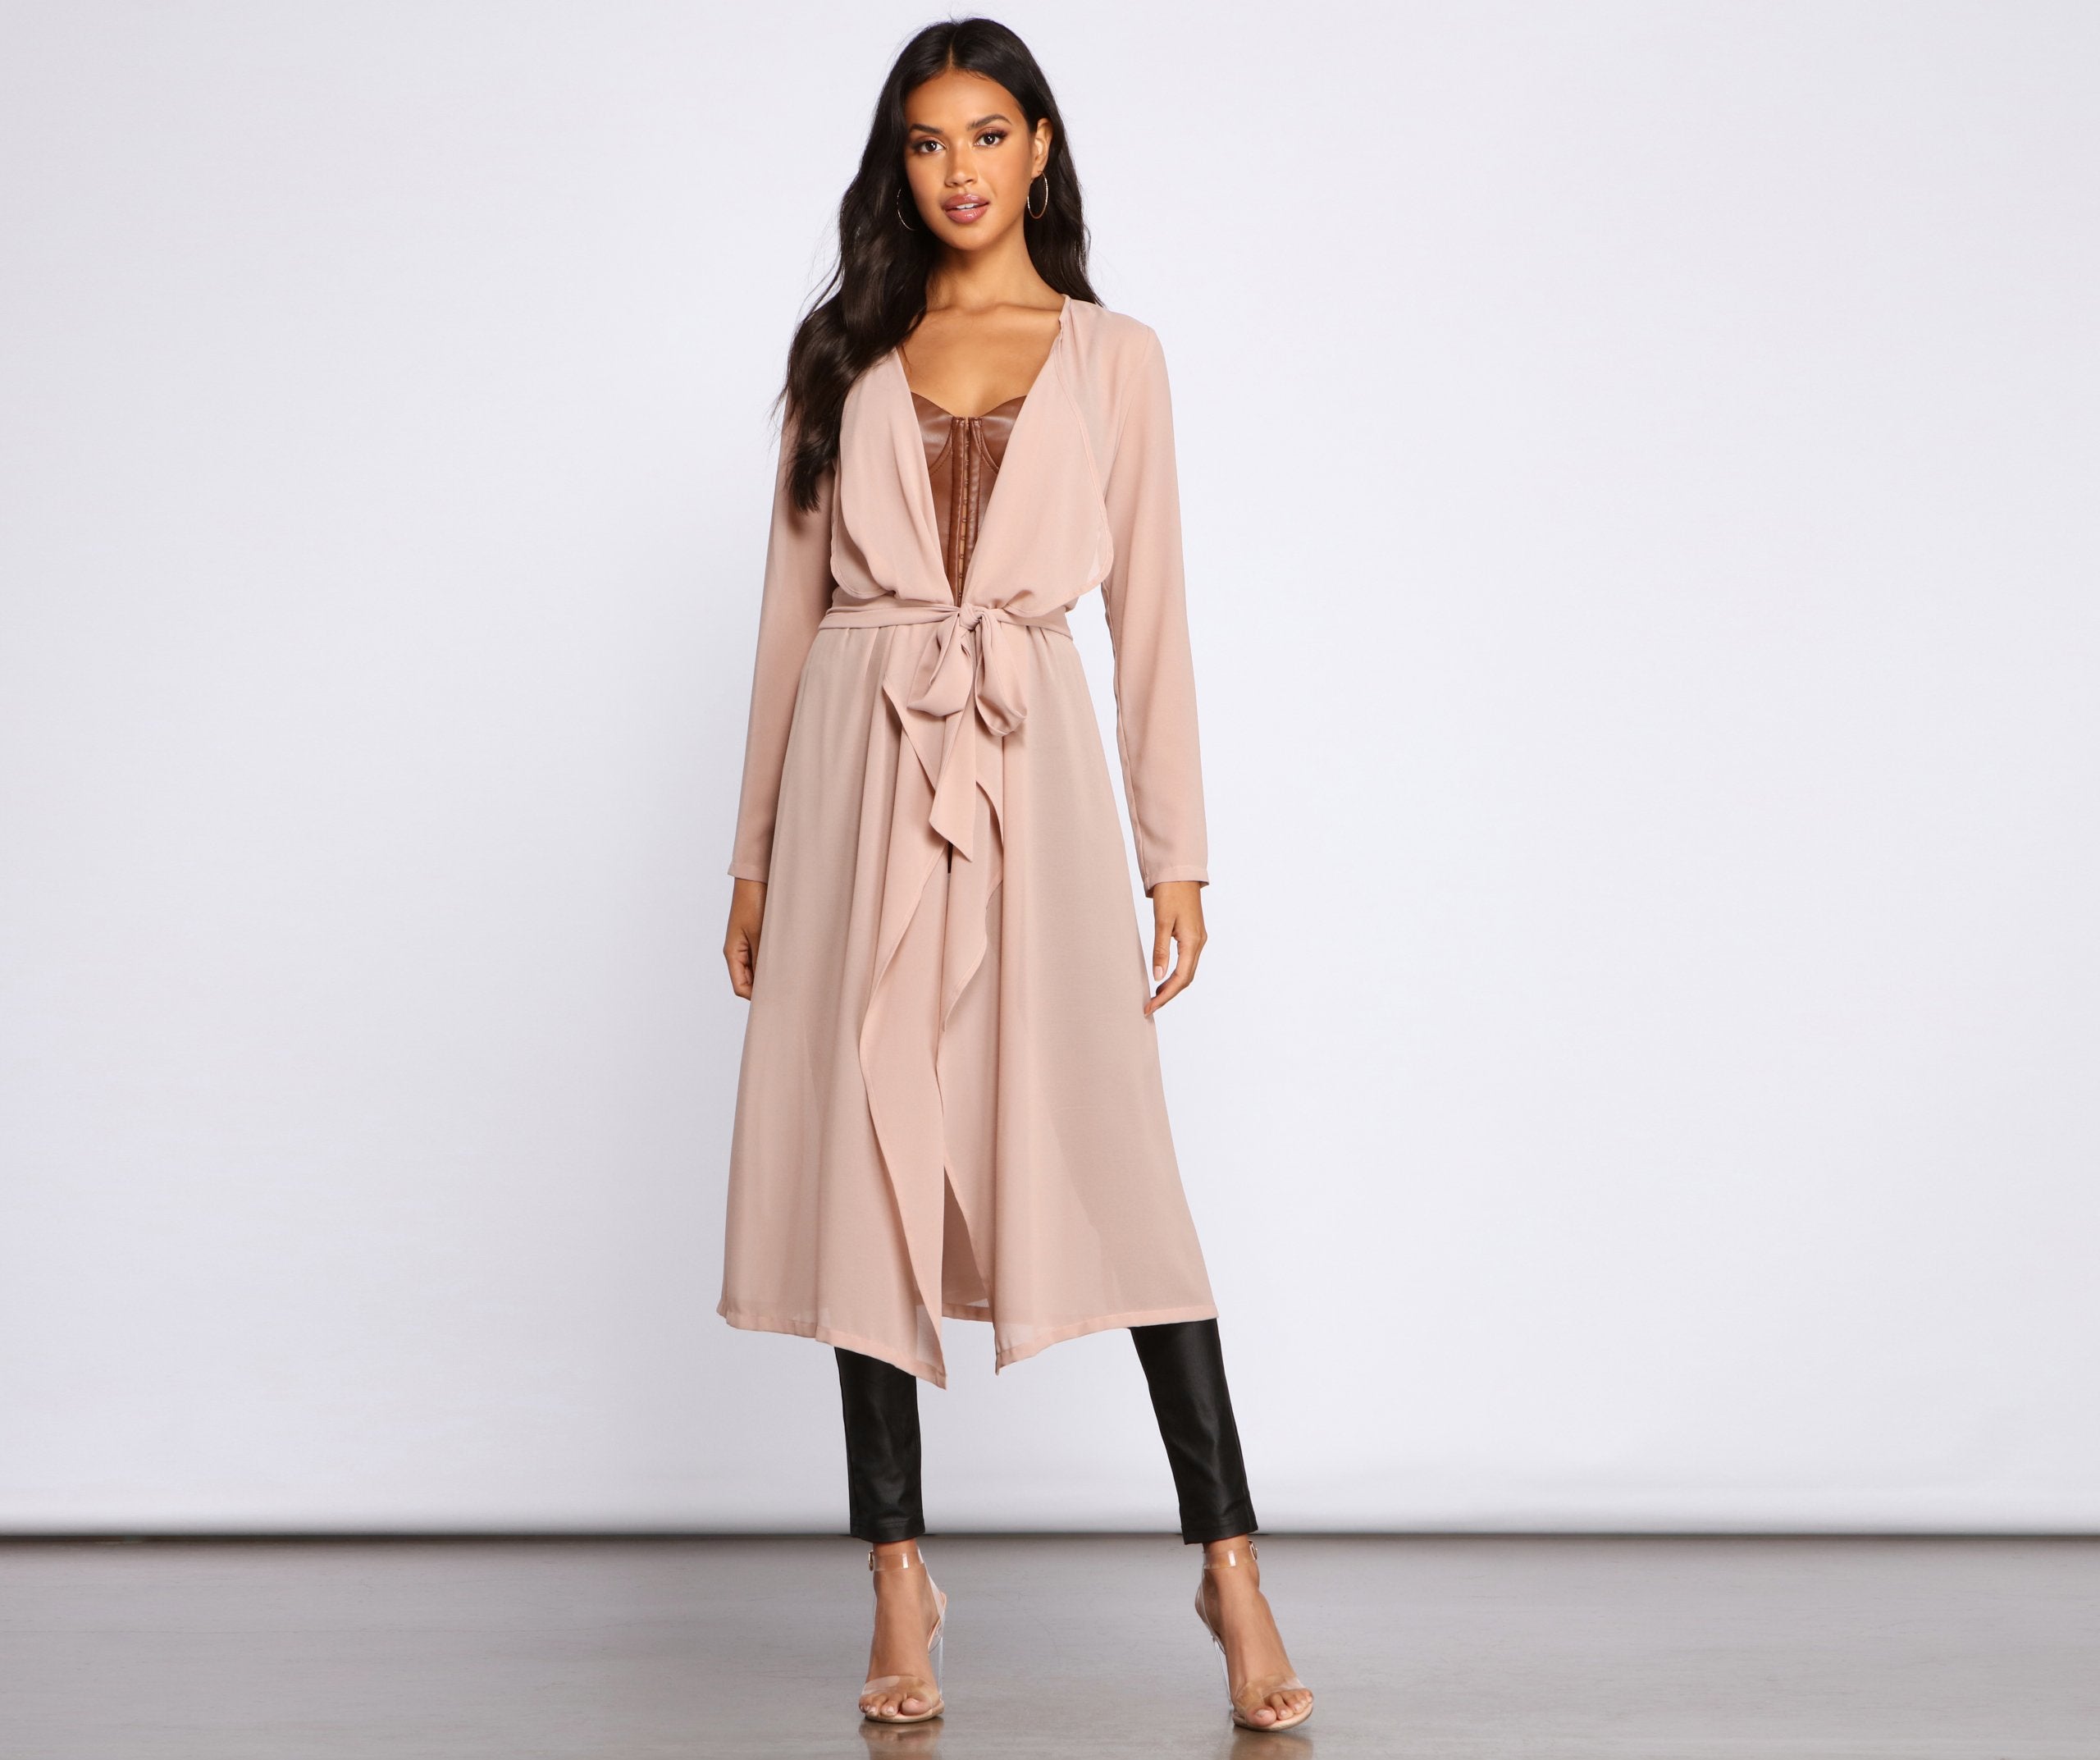 Chic Staple Chiffon Trench - Lady Occasions